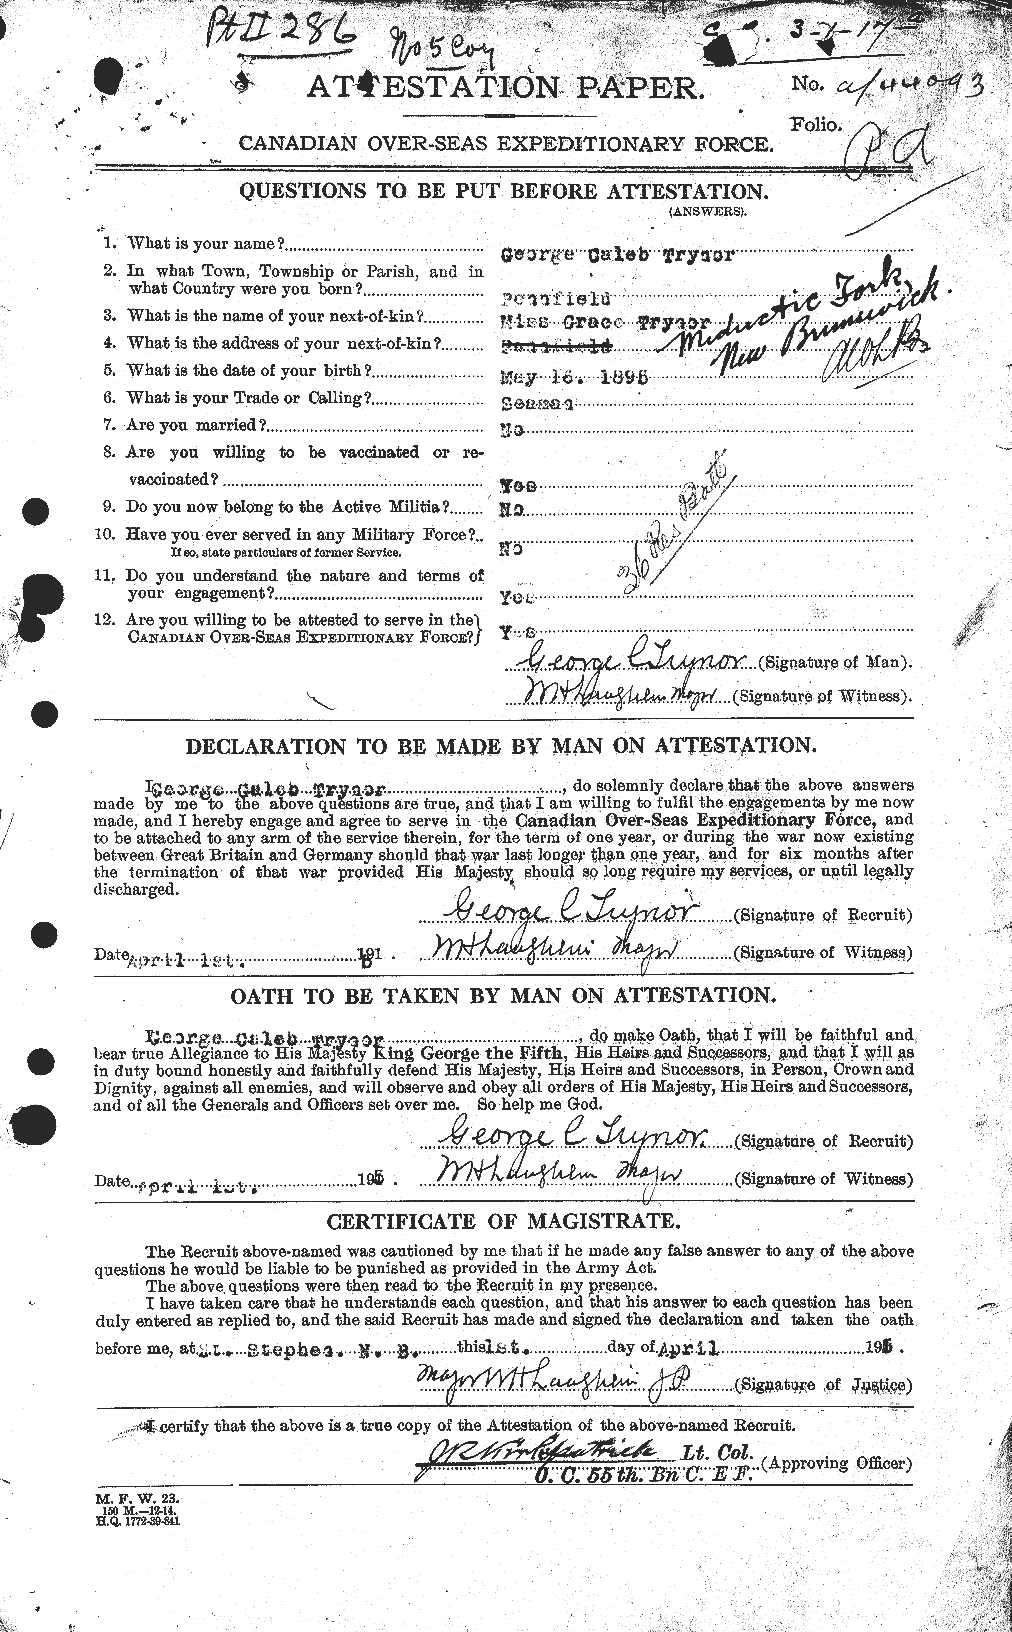 Personnel Records of the First World War - CEF 641655a